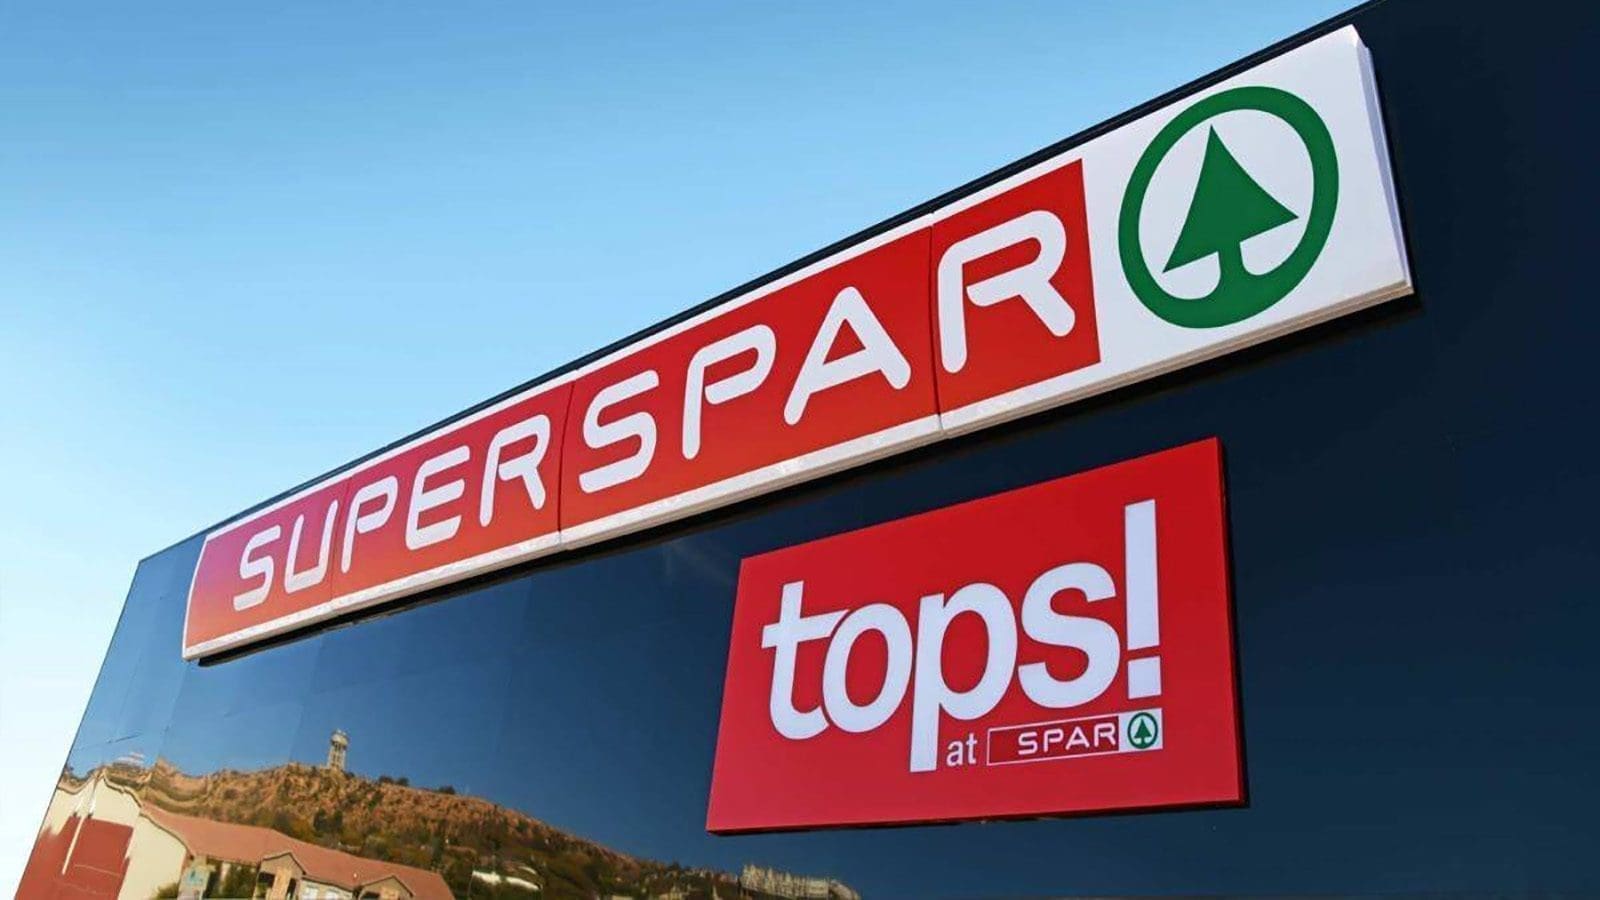 Spar Group registers single digit growth in revenue supported by home market